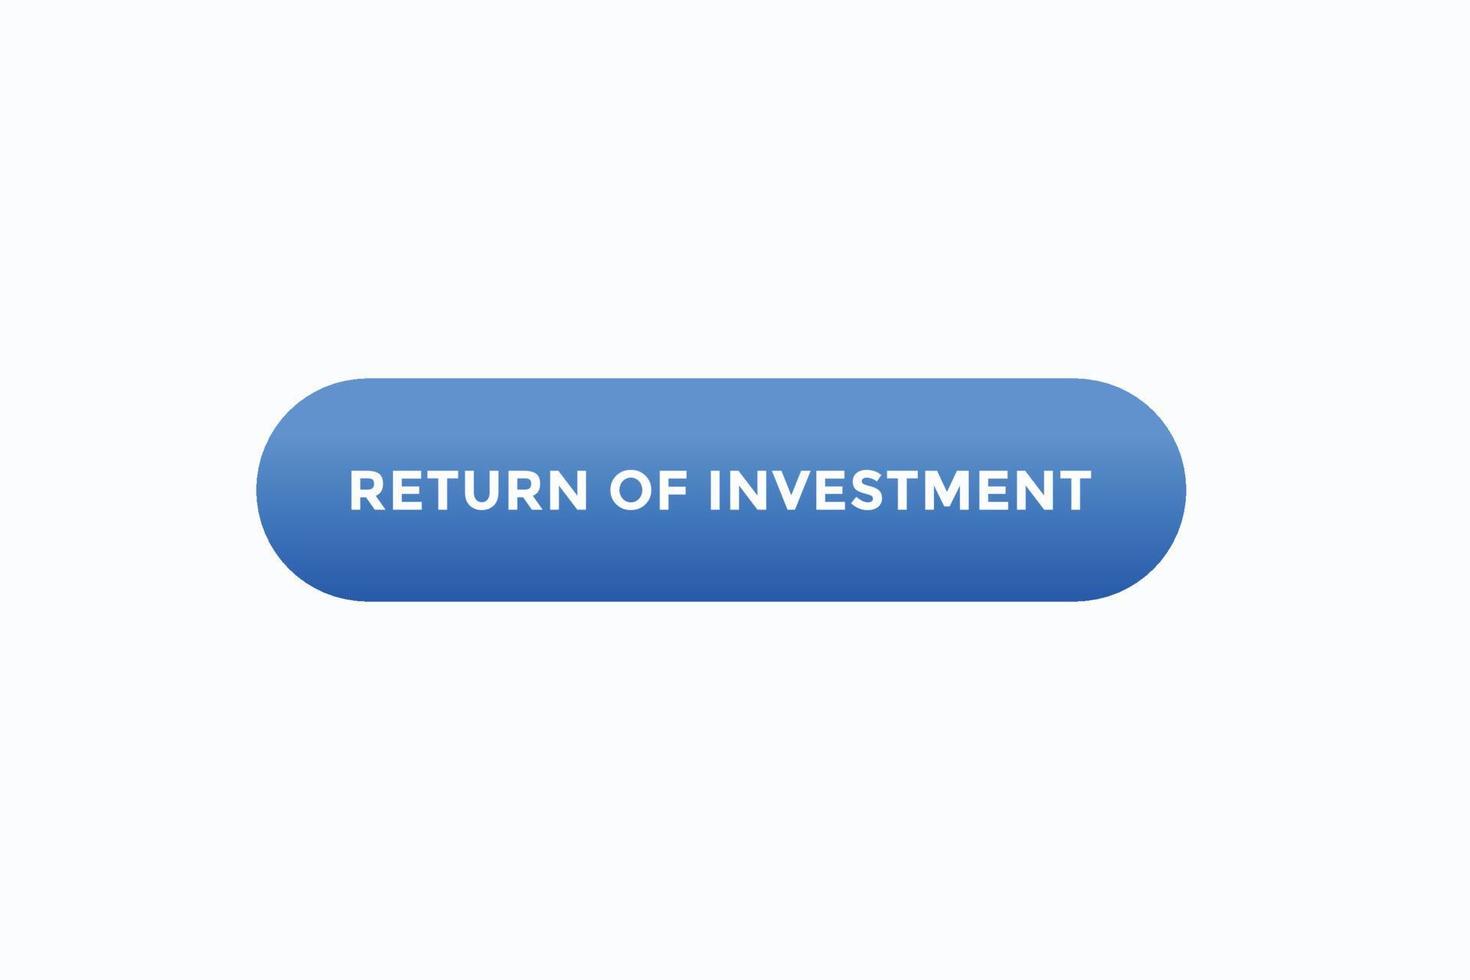 return of investment button vectors.sign label speech bubble return of investment vector